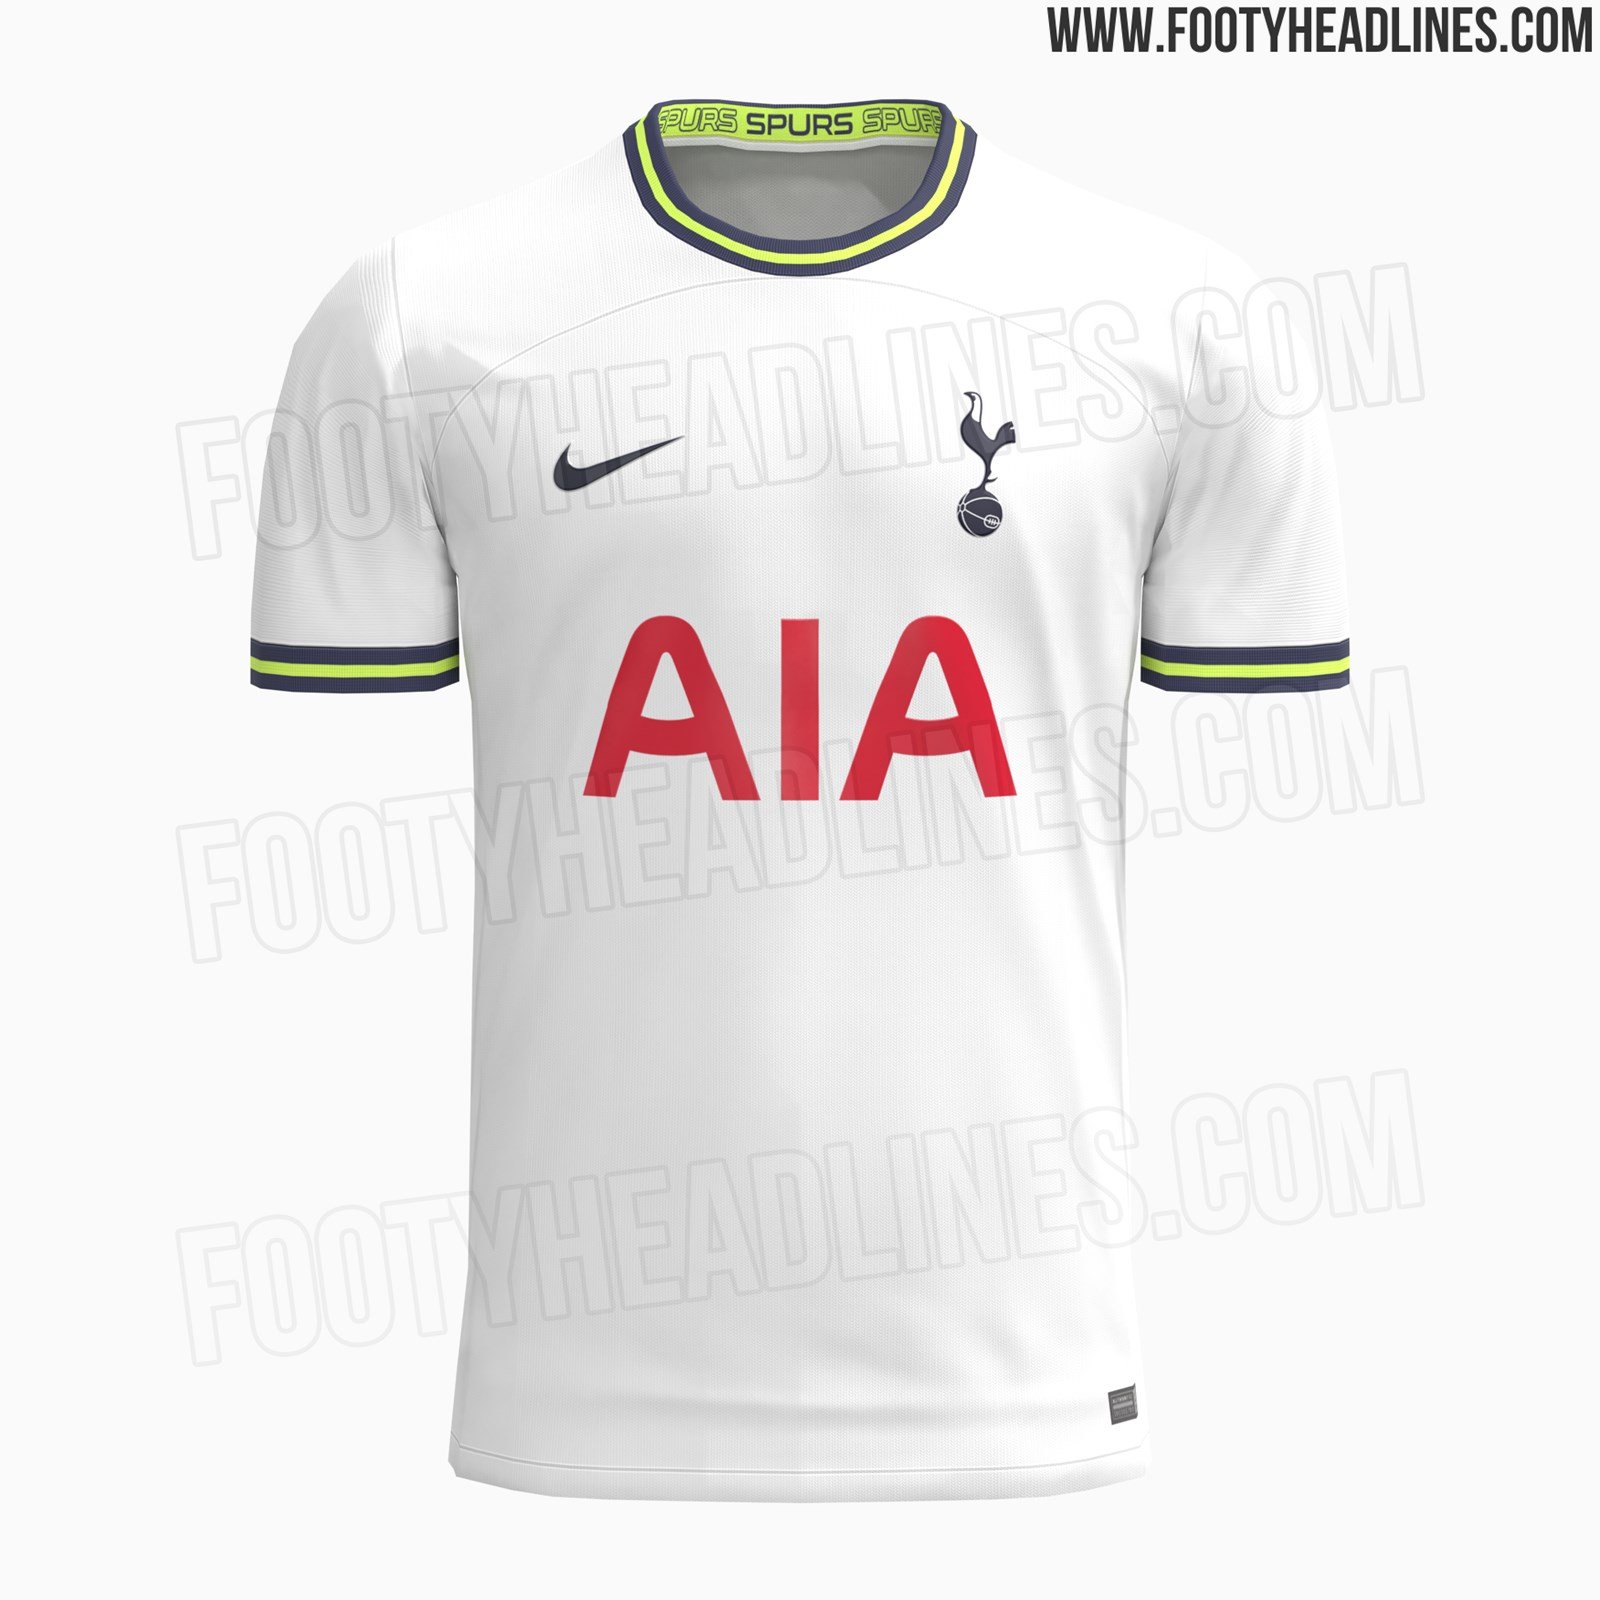 Tottenham unveil new 2021/22 Nike home kit that new signings will